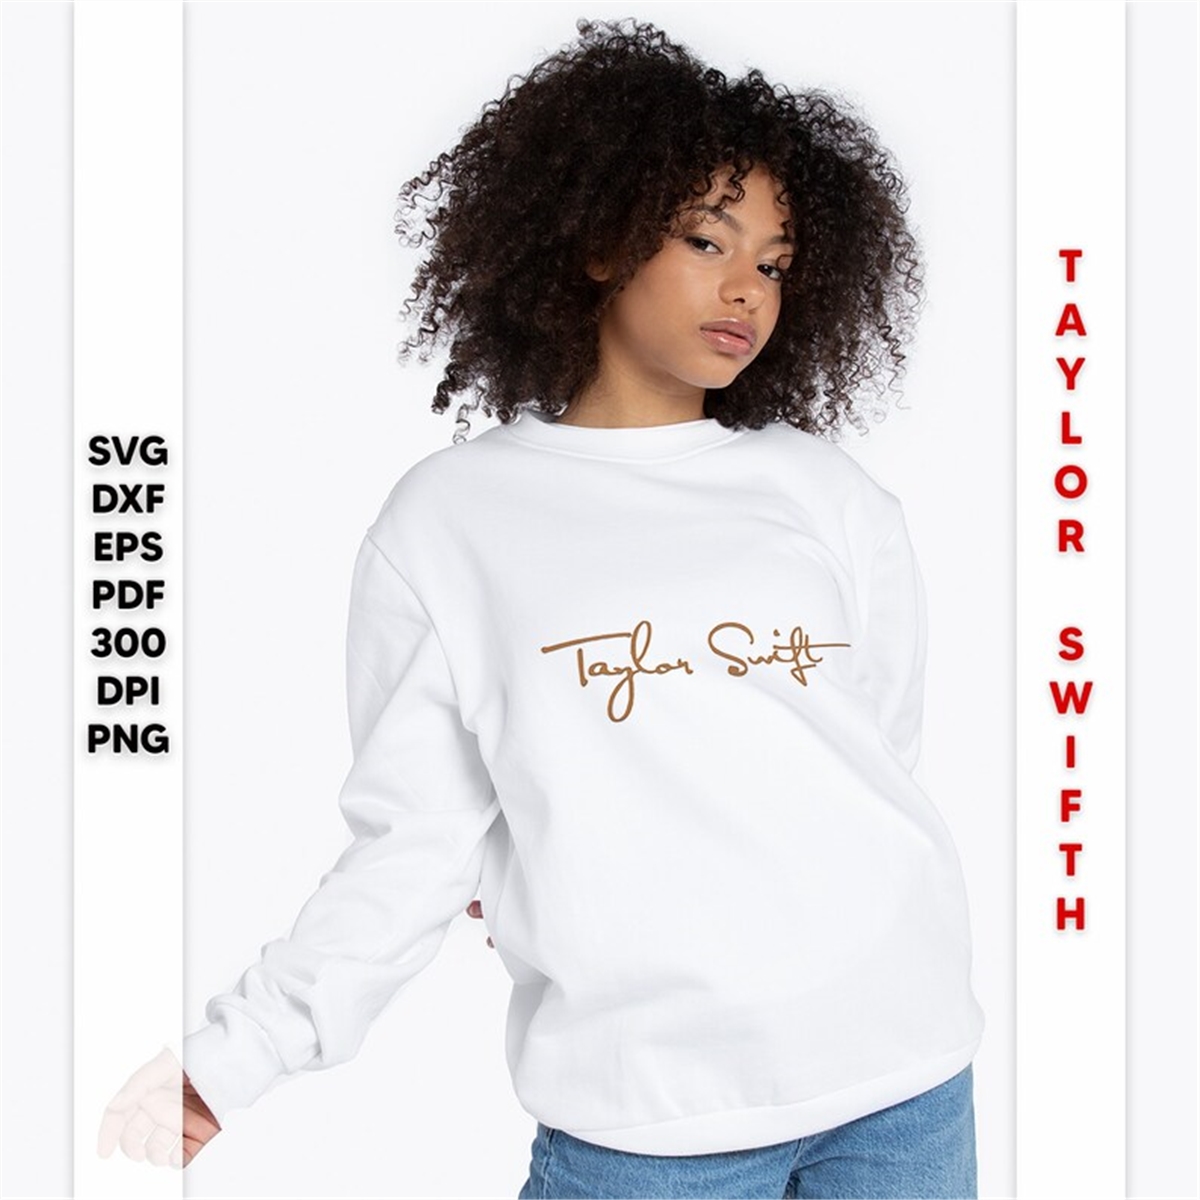 taylor-swift-svg-taylor-swift-png-swiftie-merch-gift-taylor-image-1